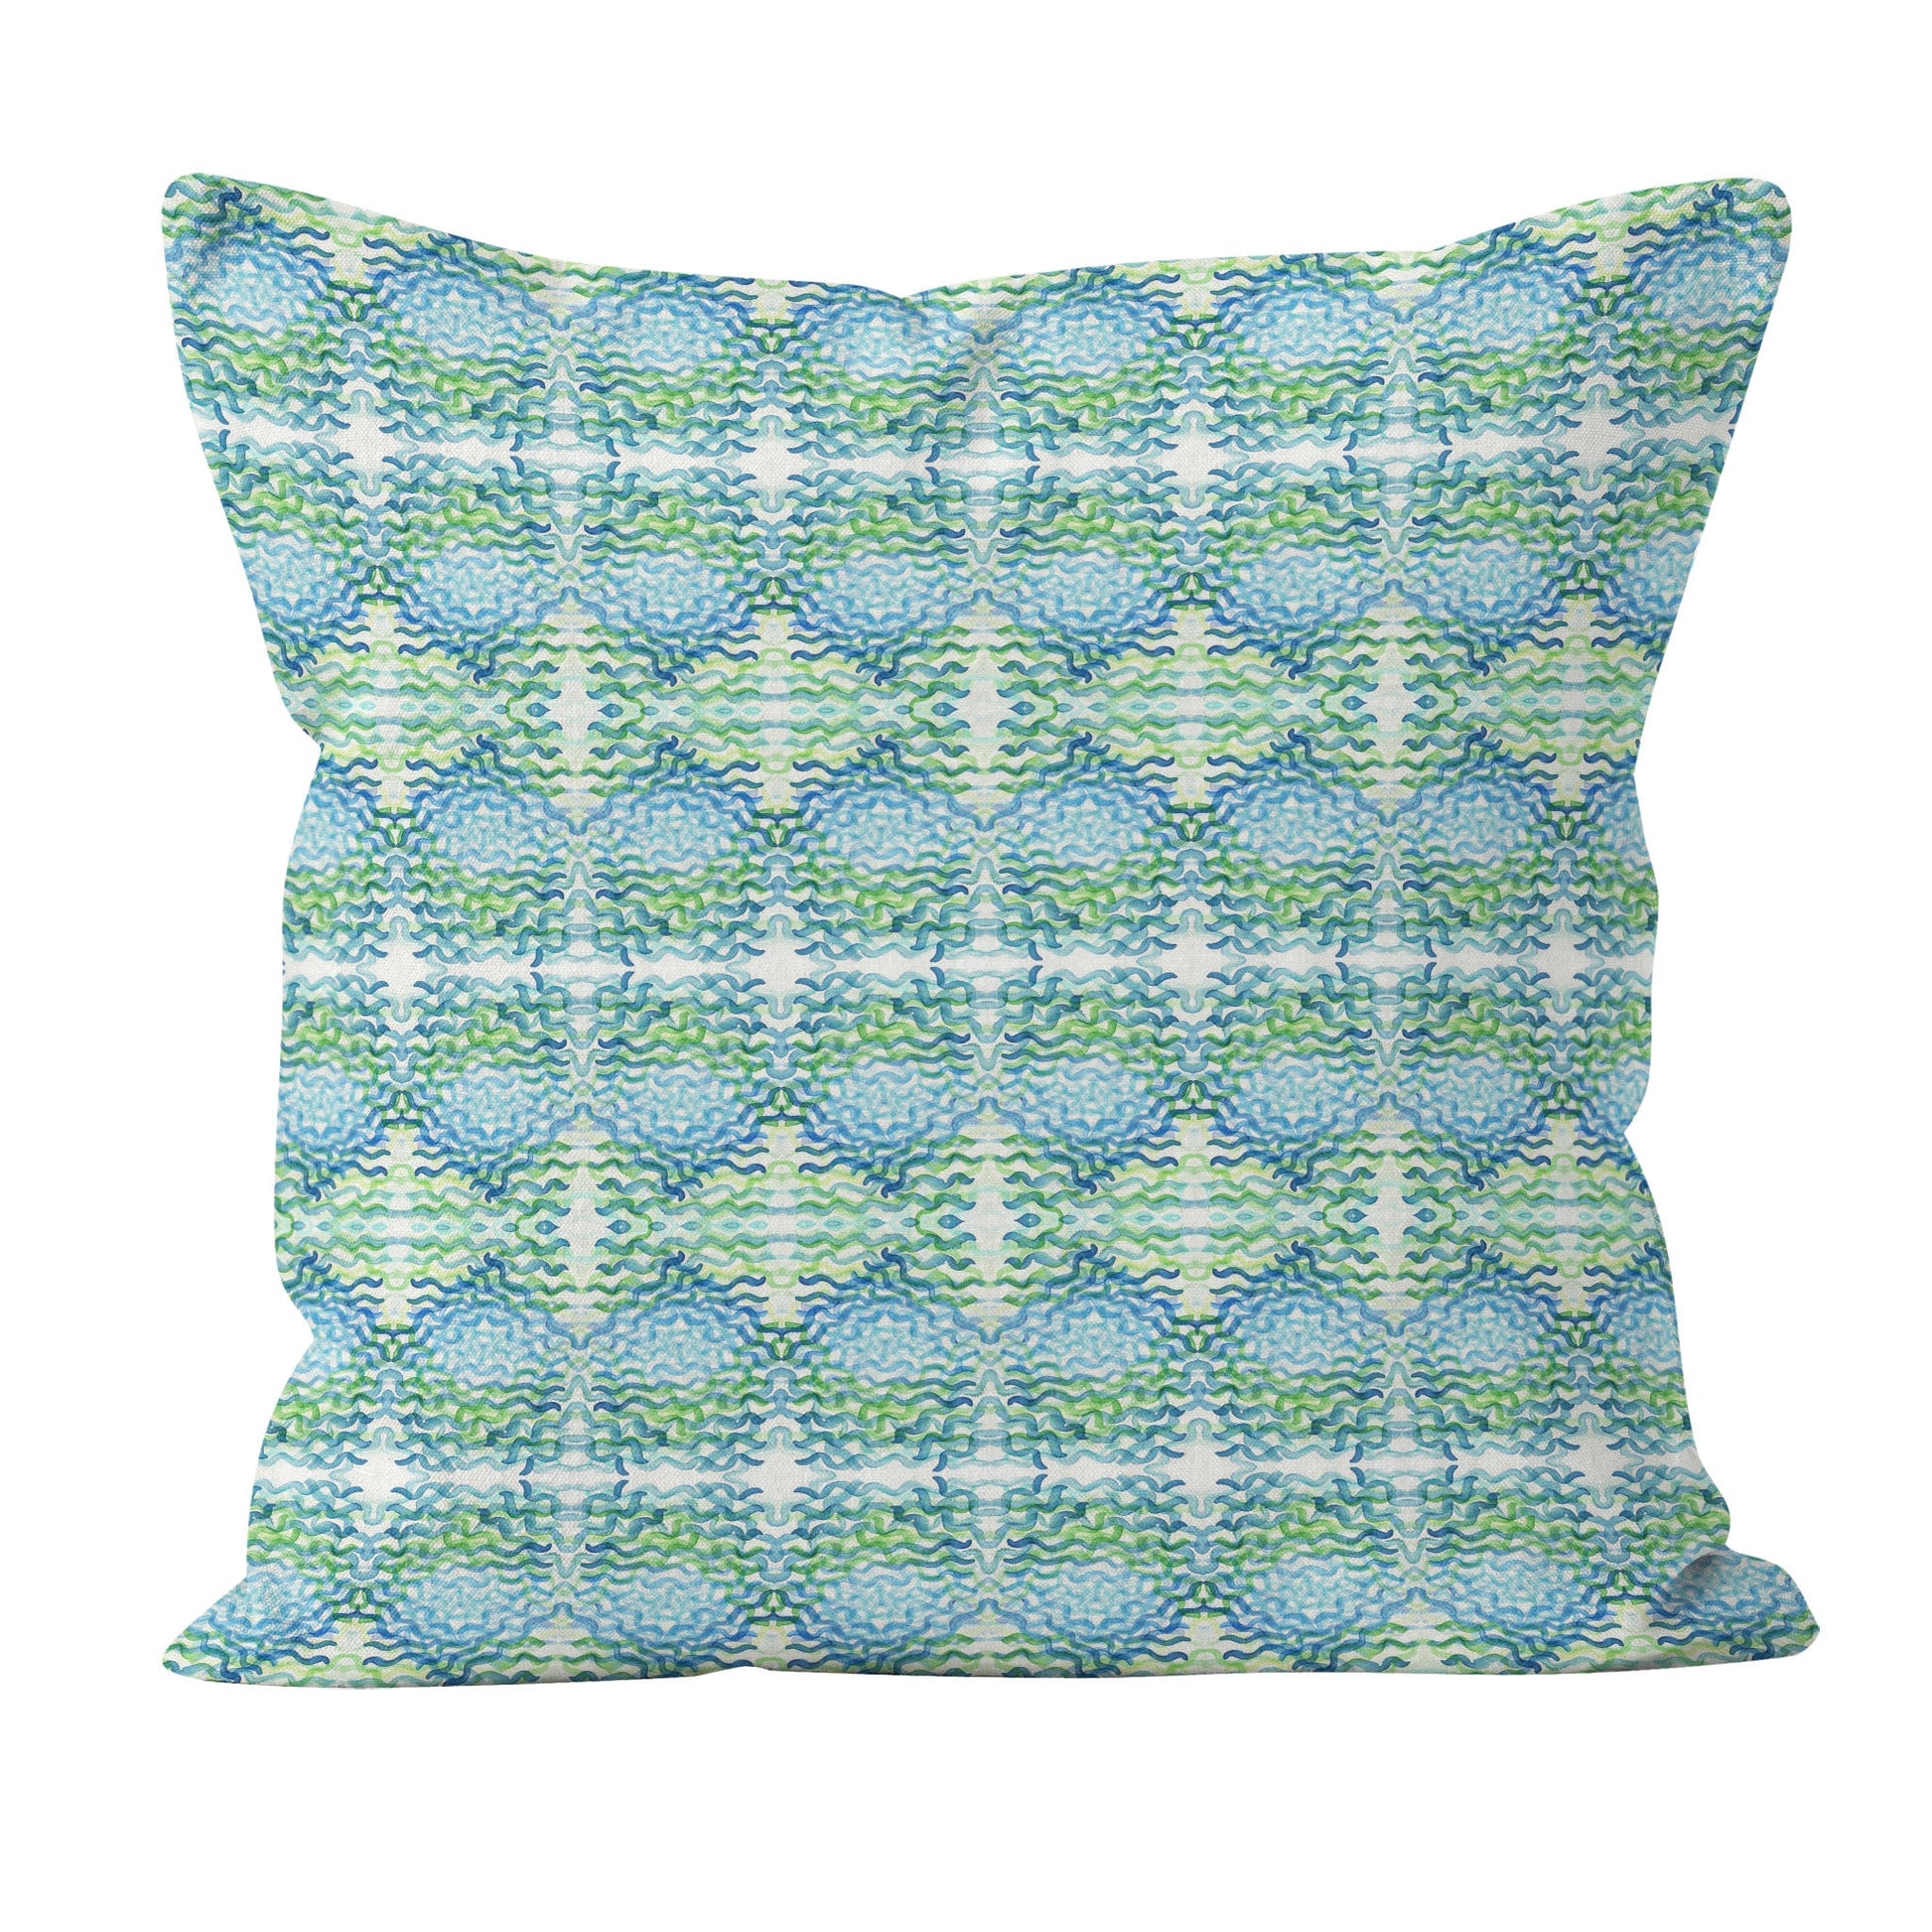 Throw pillow featuring a blue and green abstract, hand-painted watercolor pattern.